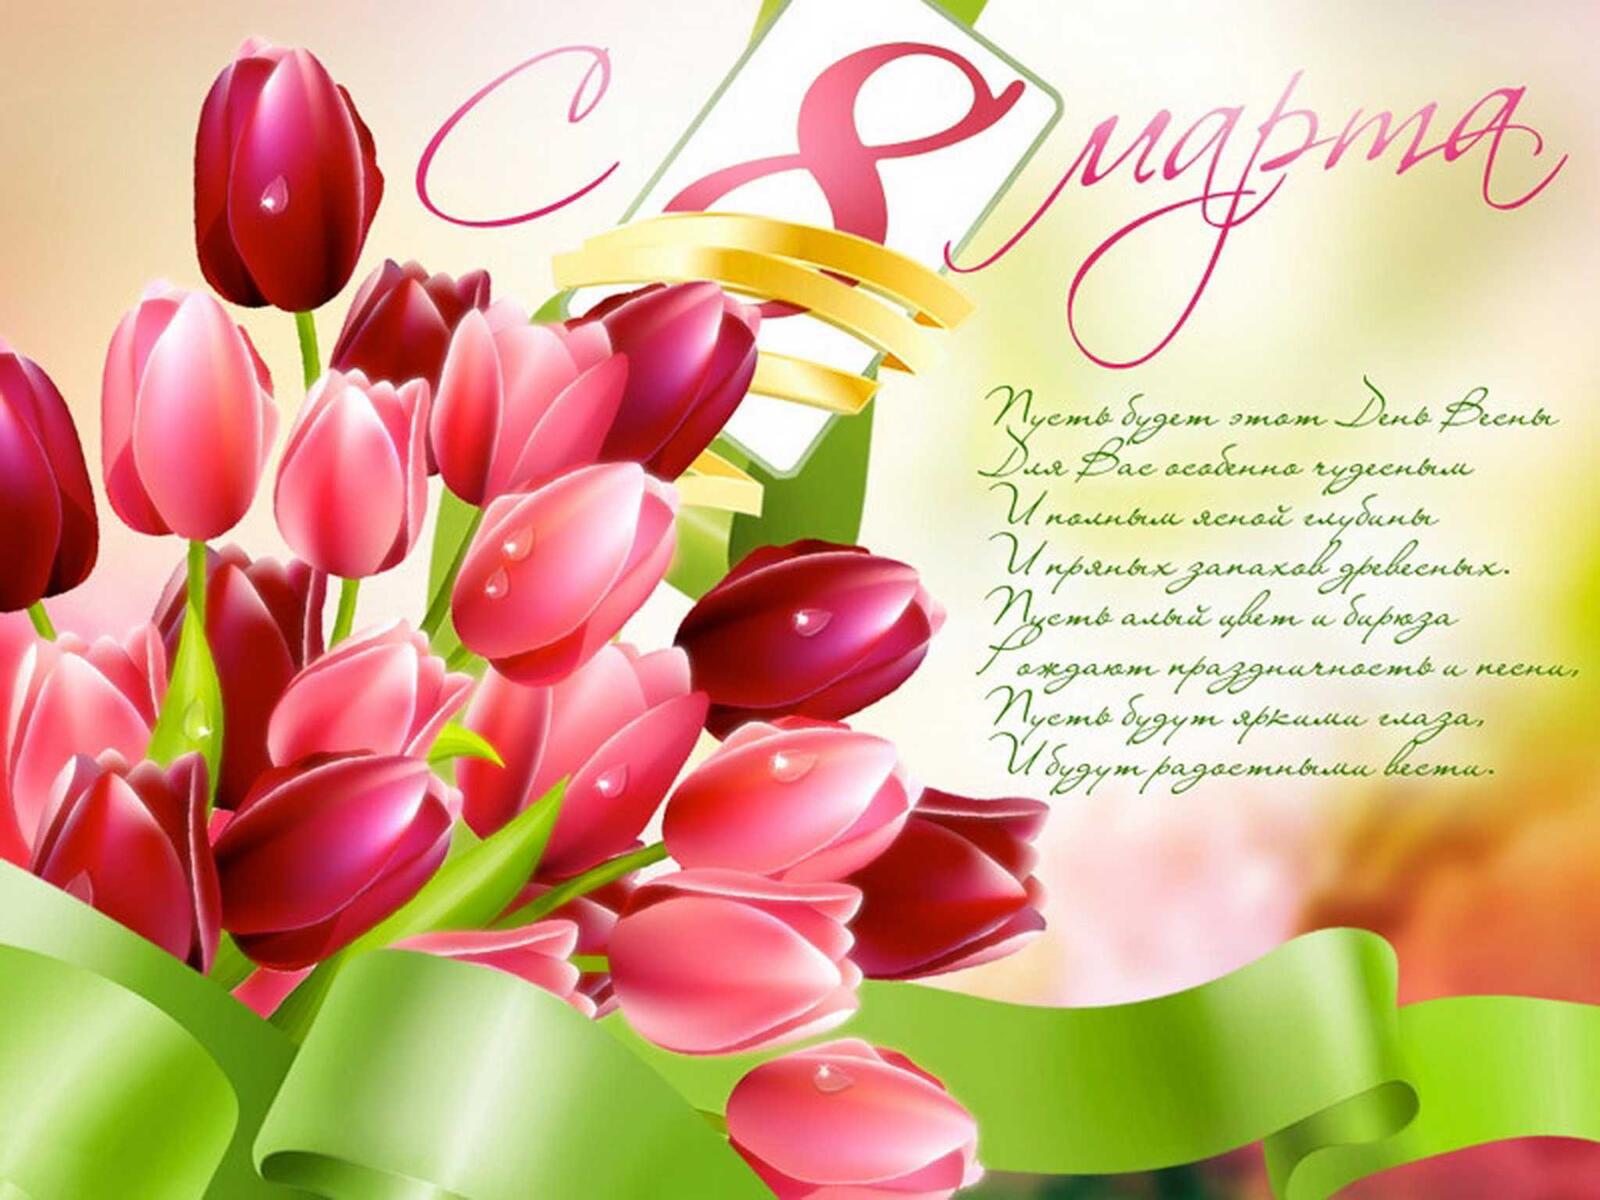 Bouquet of pink tulips for March 8